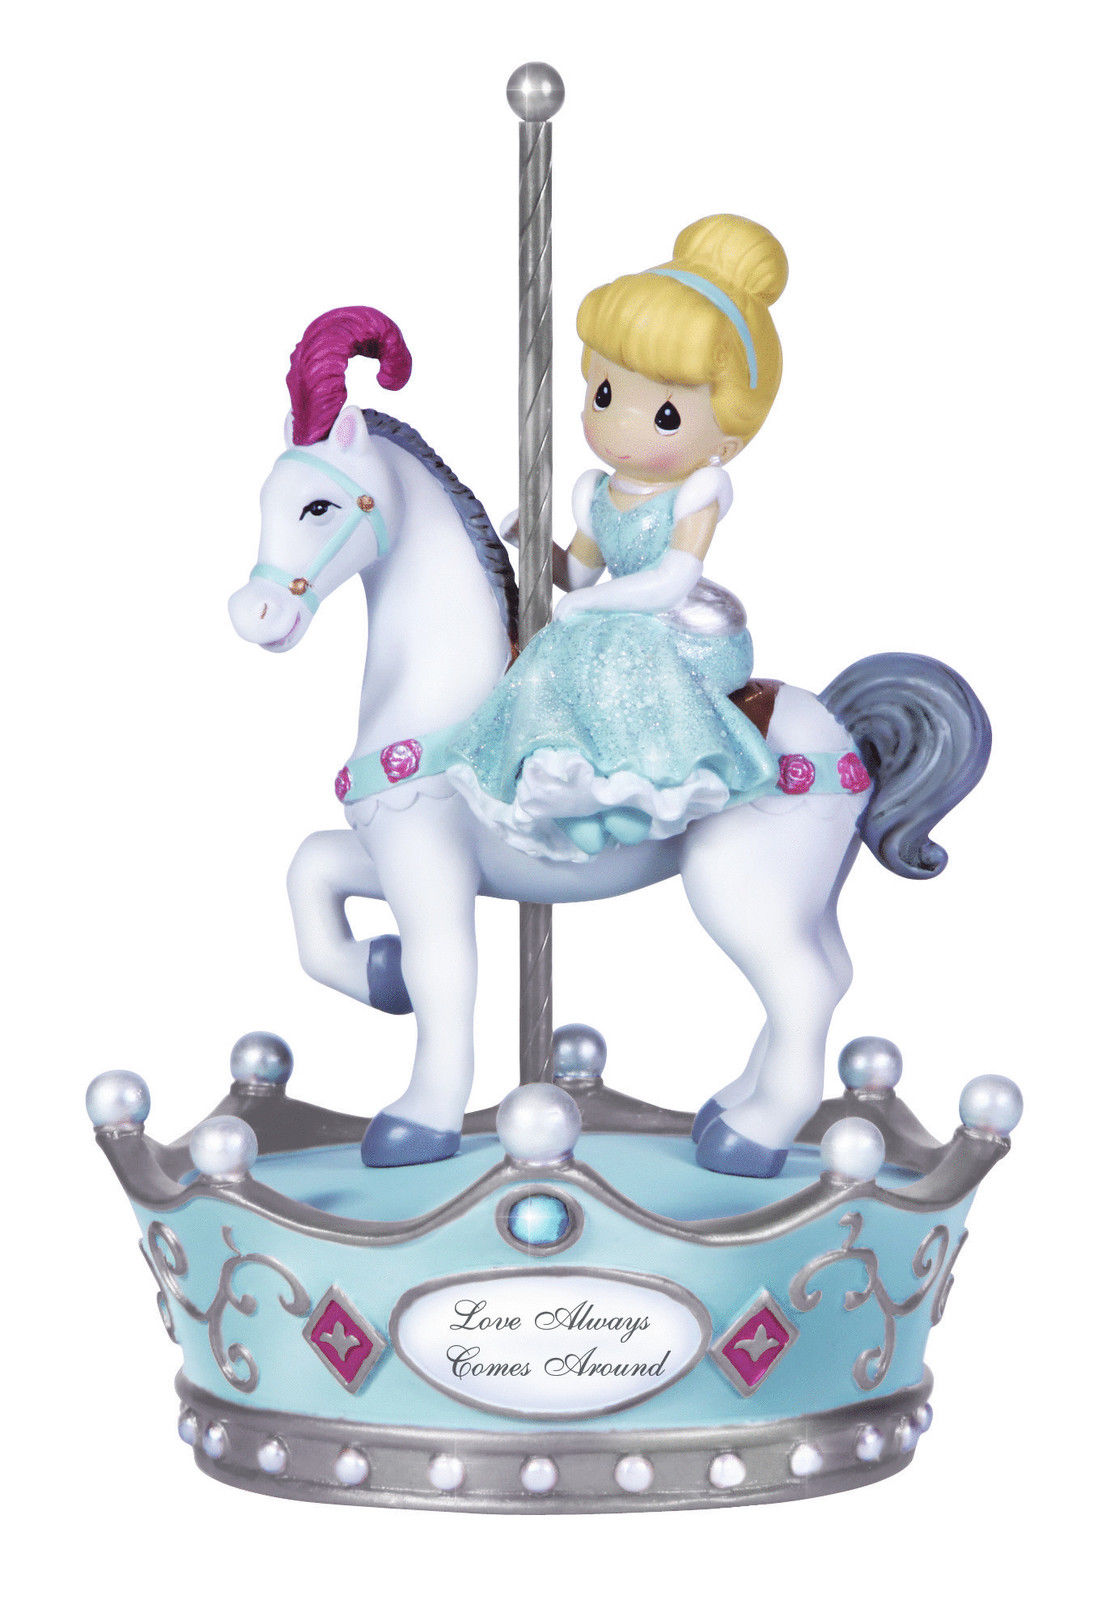 Image Disney Precious Moments Musical Figurines Pc Android